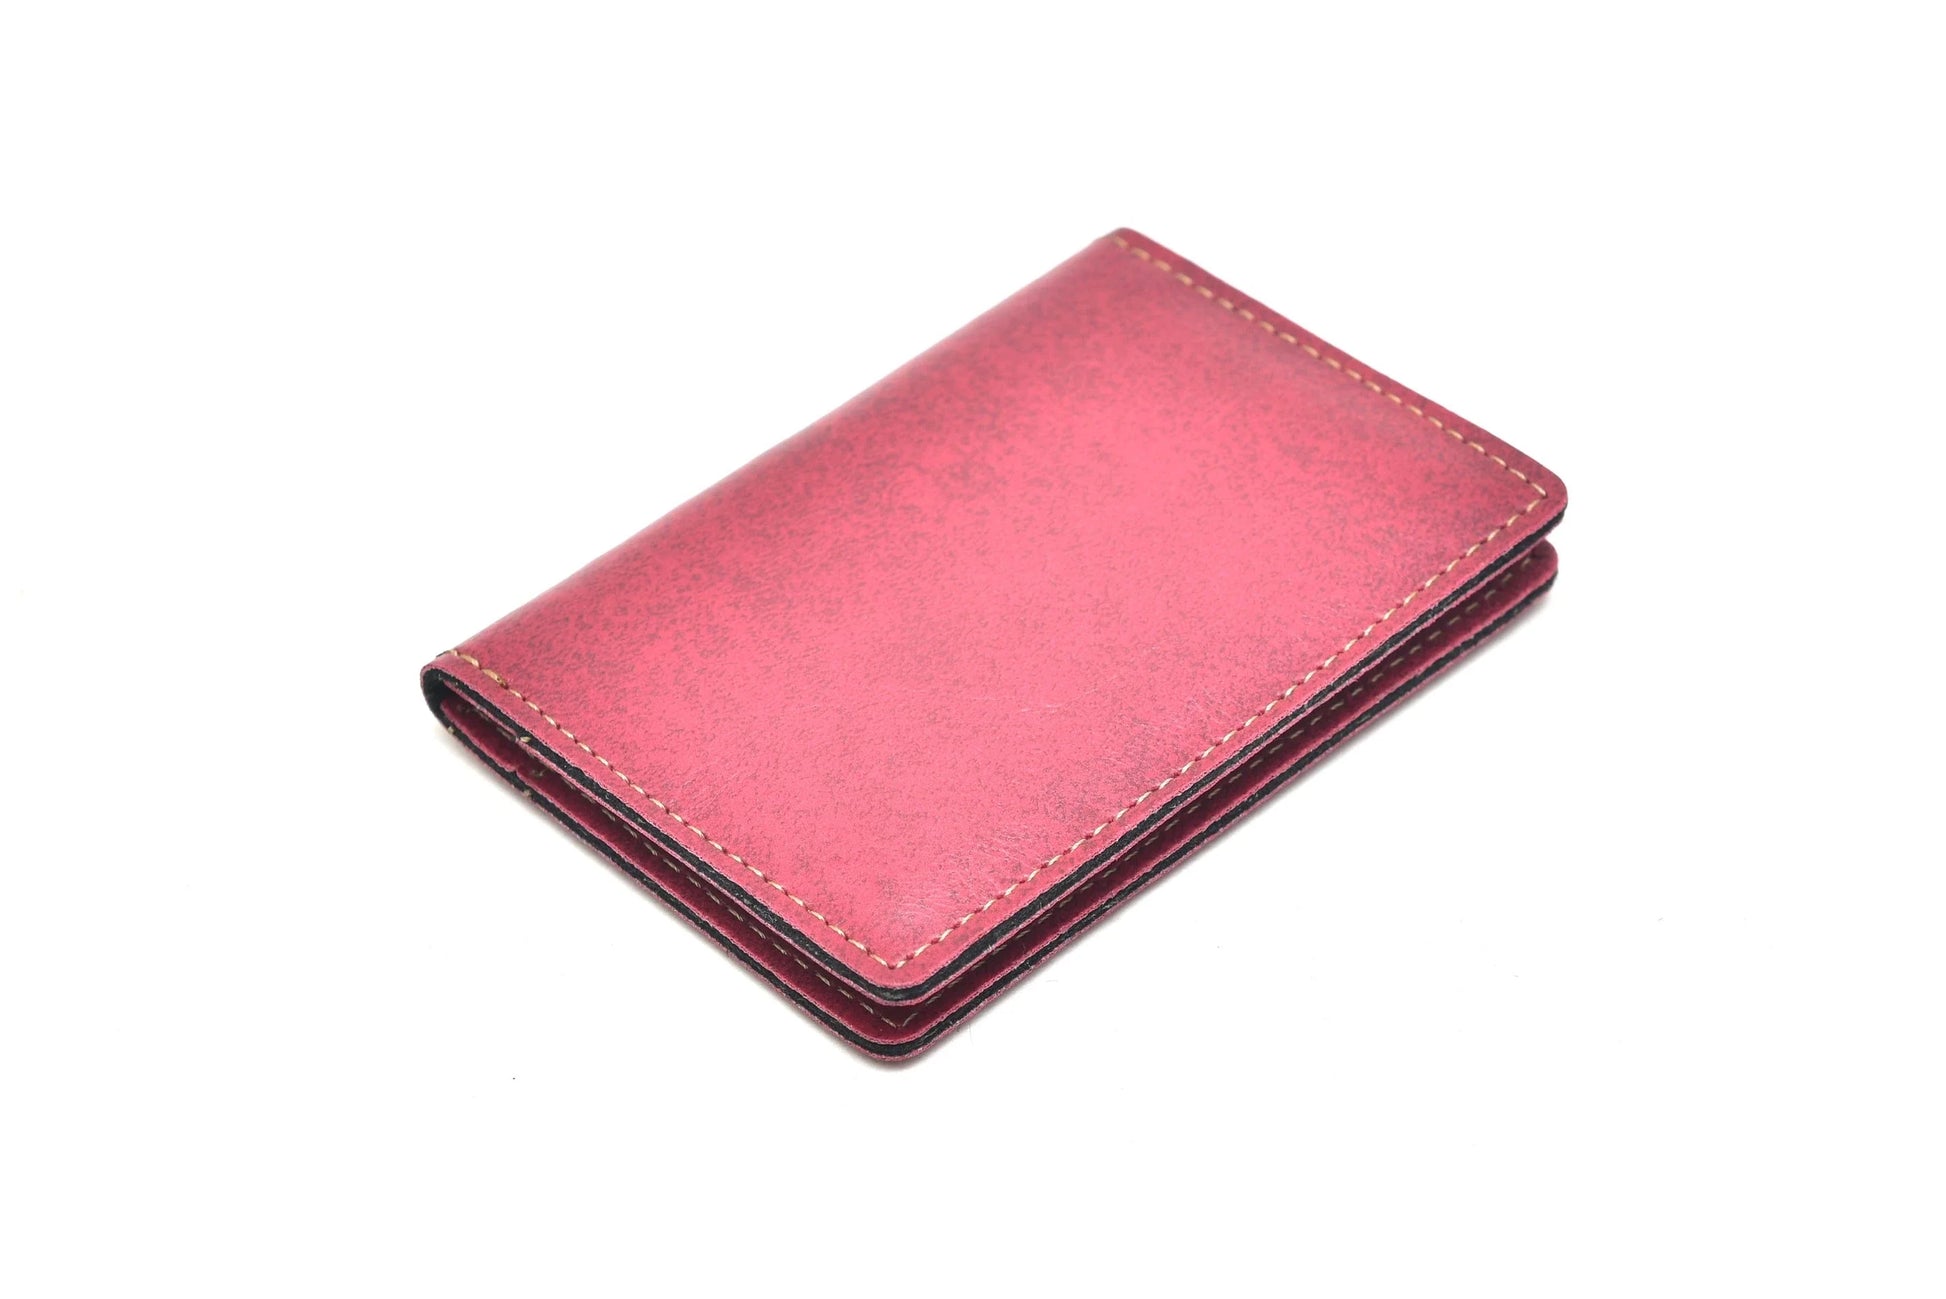 Make your passport a fashion accessory with a custom-made leather case that is both classy and functional.